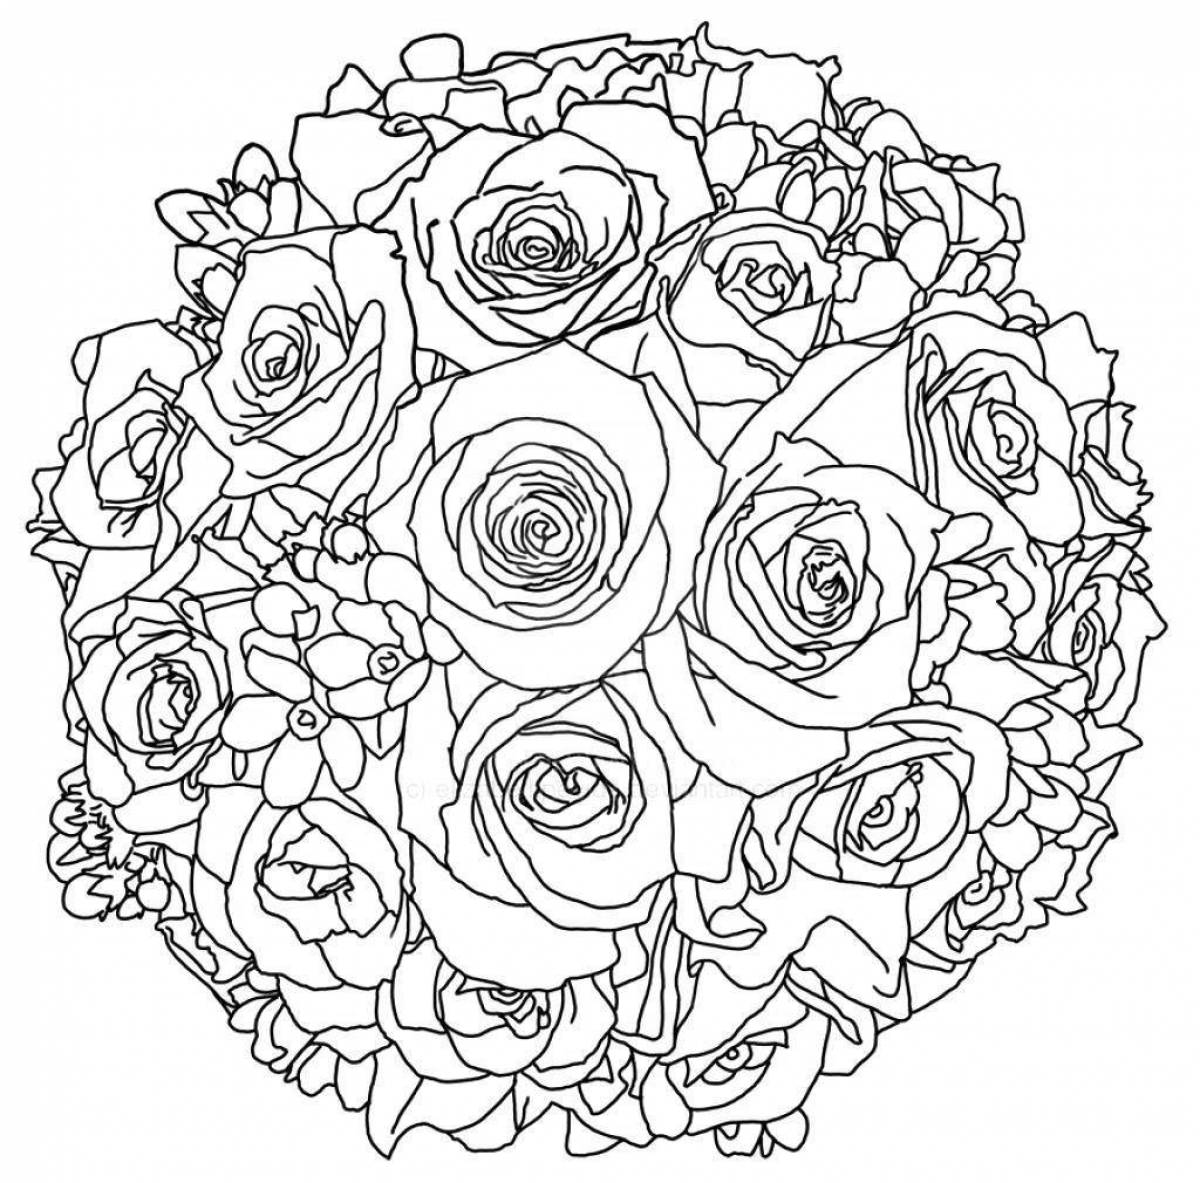 Coloring bouquet of roses